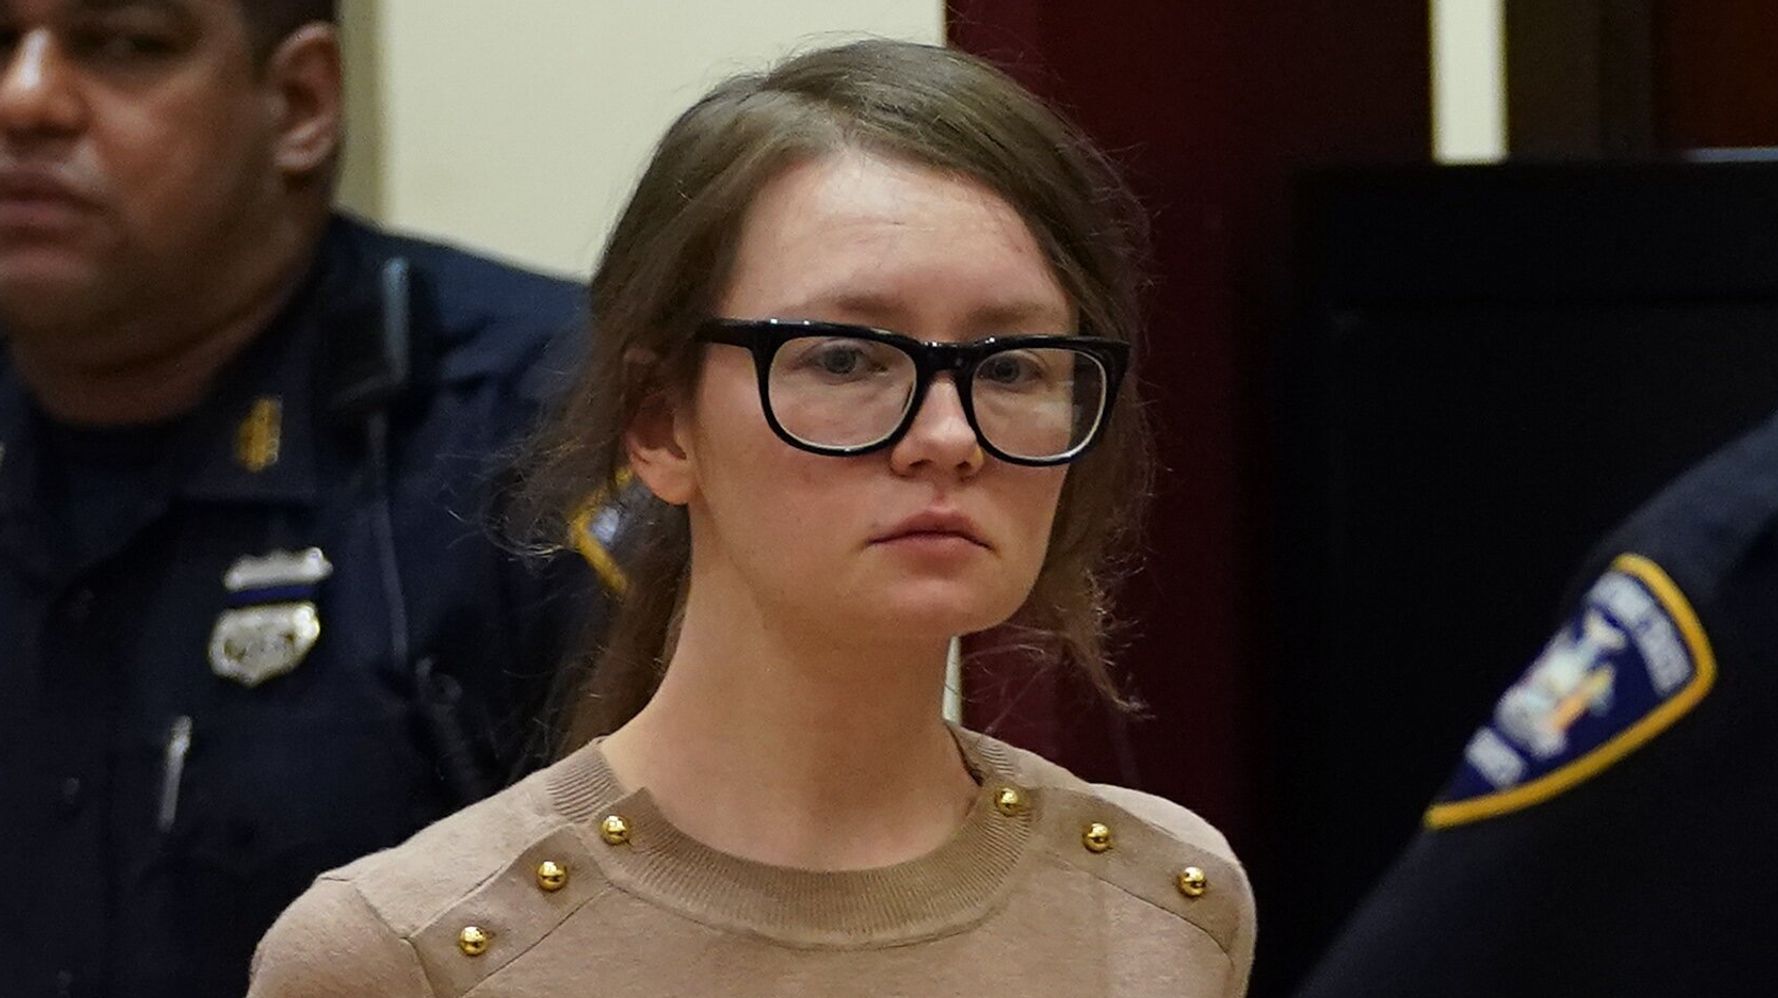 Scammer Anna Delvey Sentenced To 4 To 12 Years In Prison.